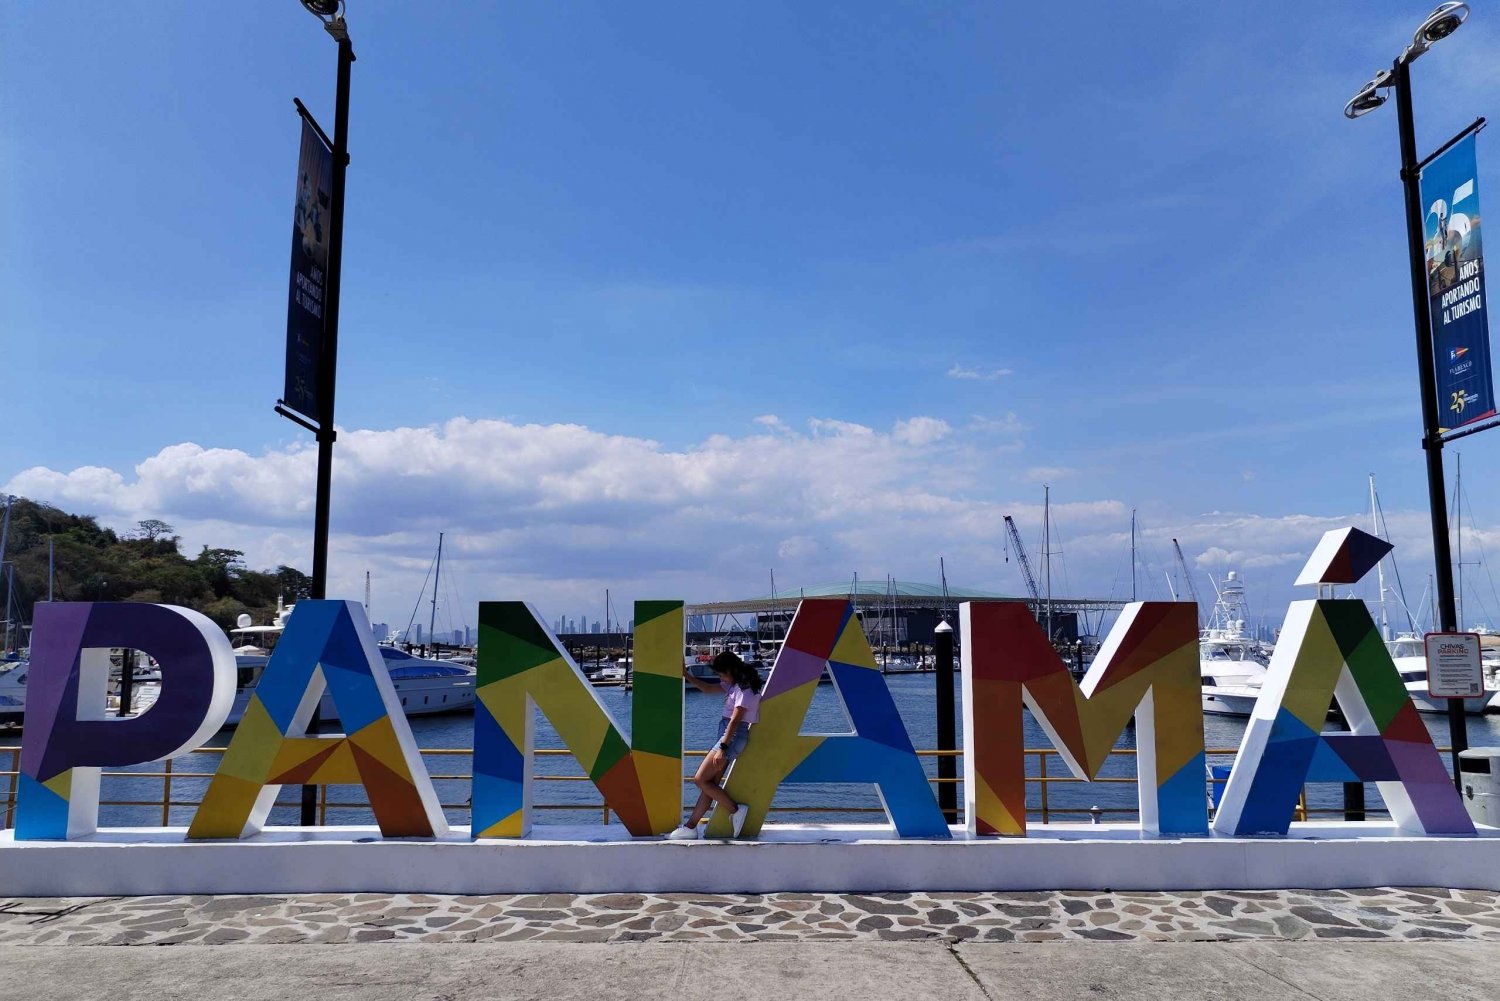 Best day trips in Panama City, Panama